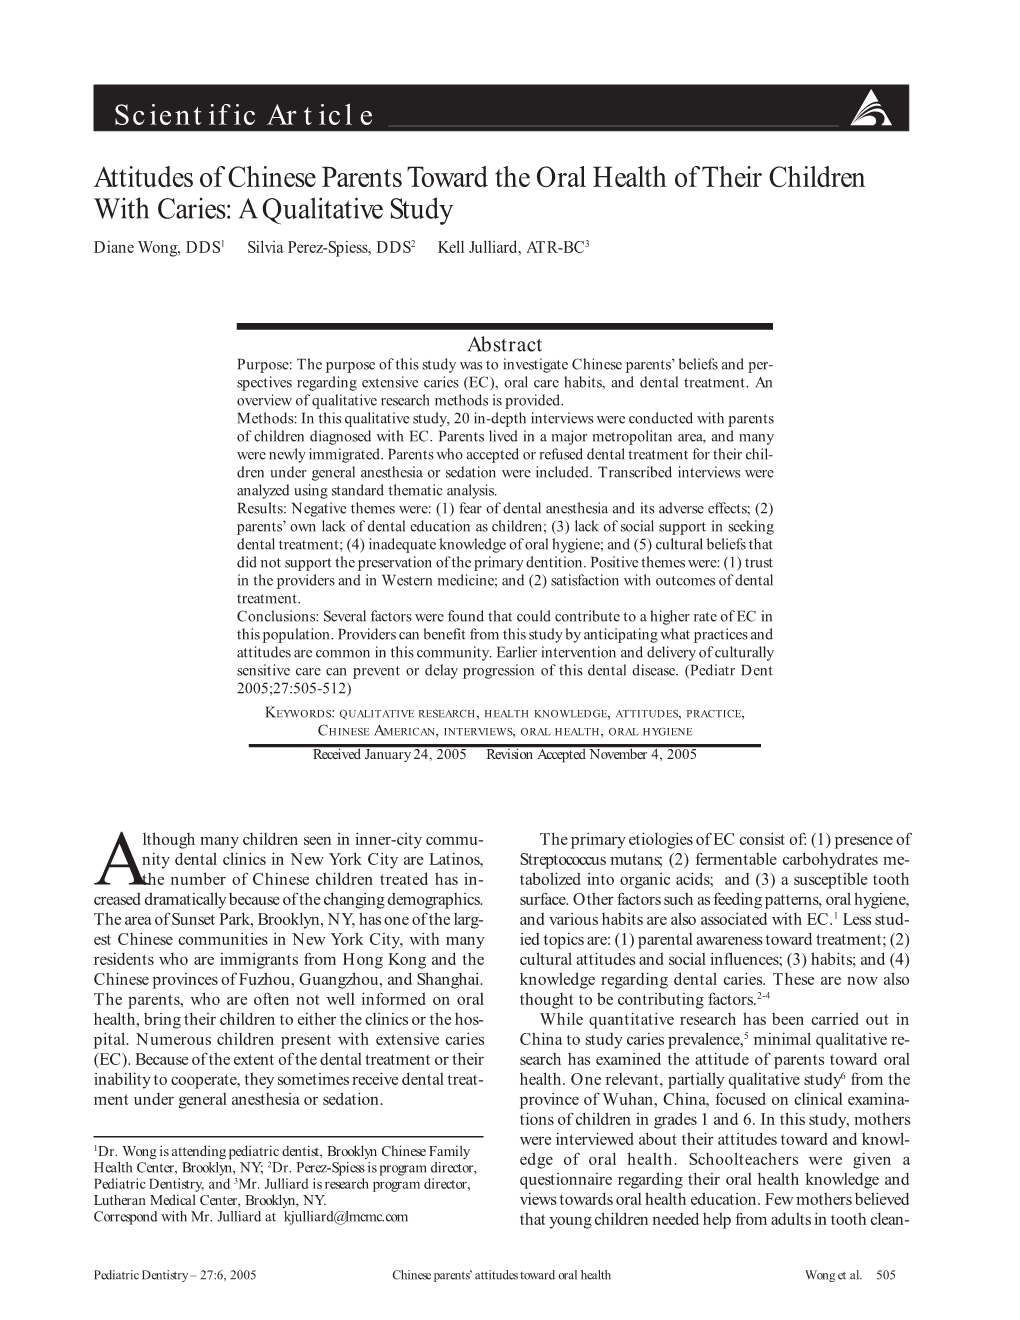 Attitudes of Chinese Parents Toward the Oral Health of Their Children